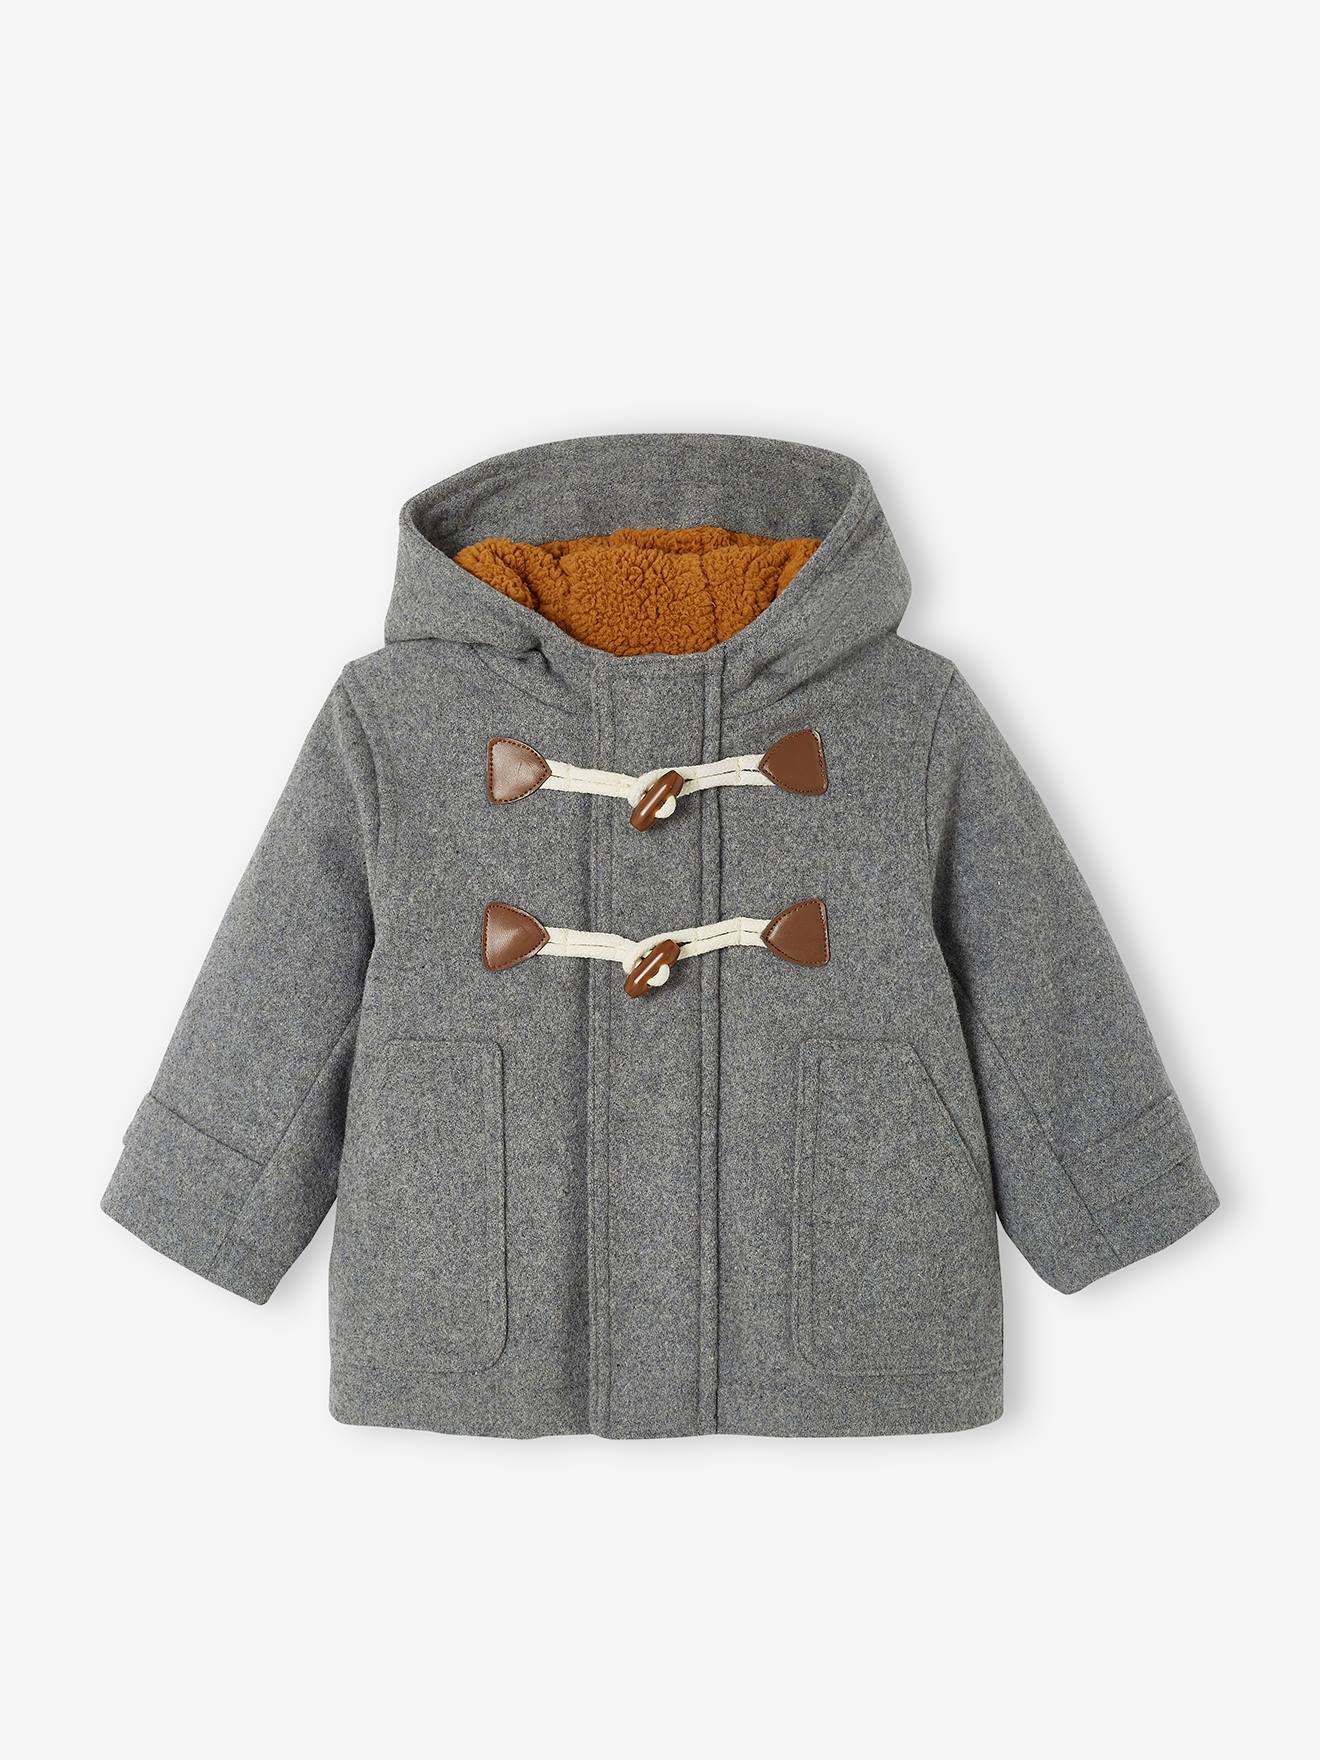 Inzet Anoniem satelliet Hooded Duffle Coat for Babies - grey stripes, Baby